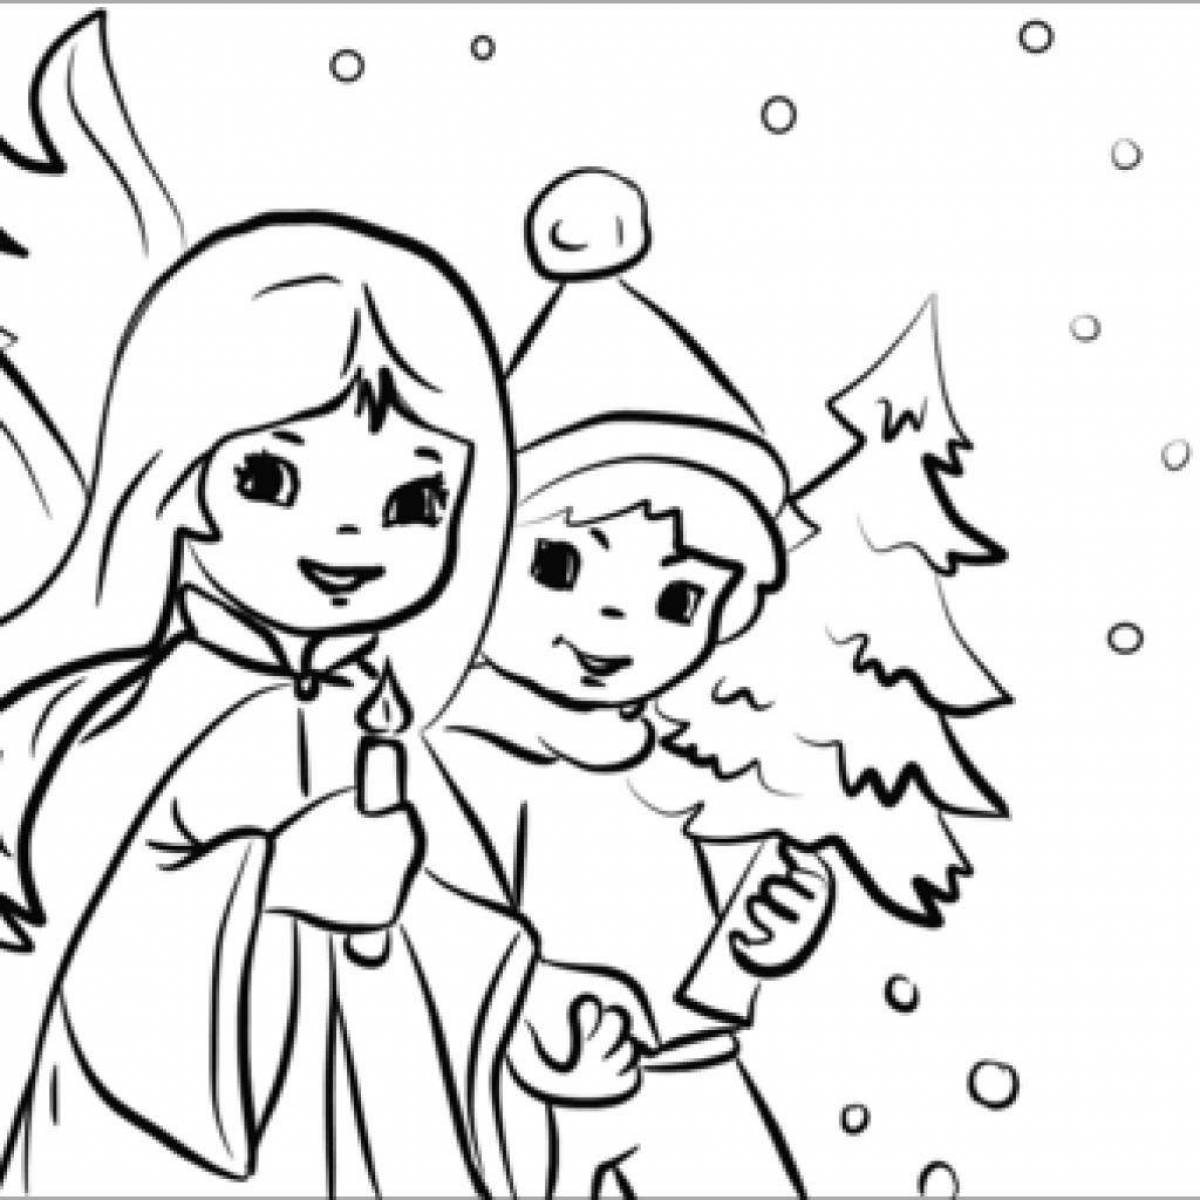 Children's Christmas grand coloring